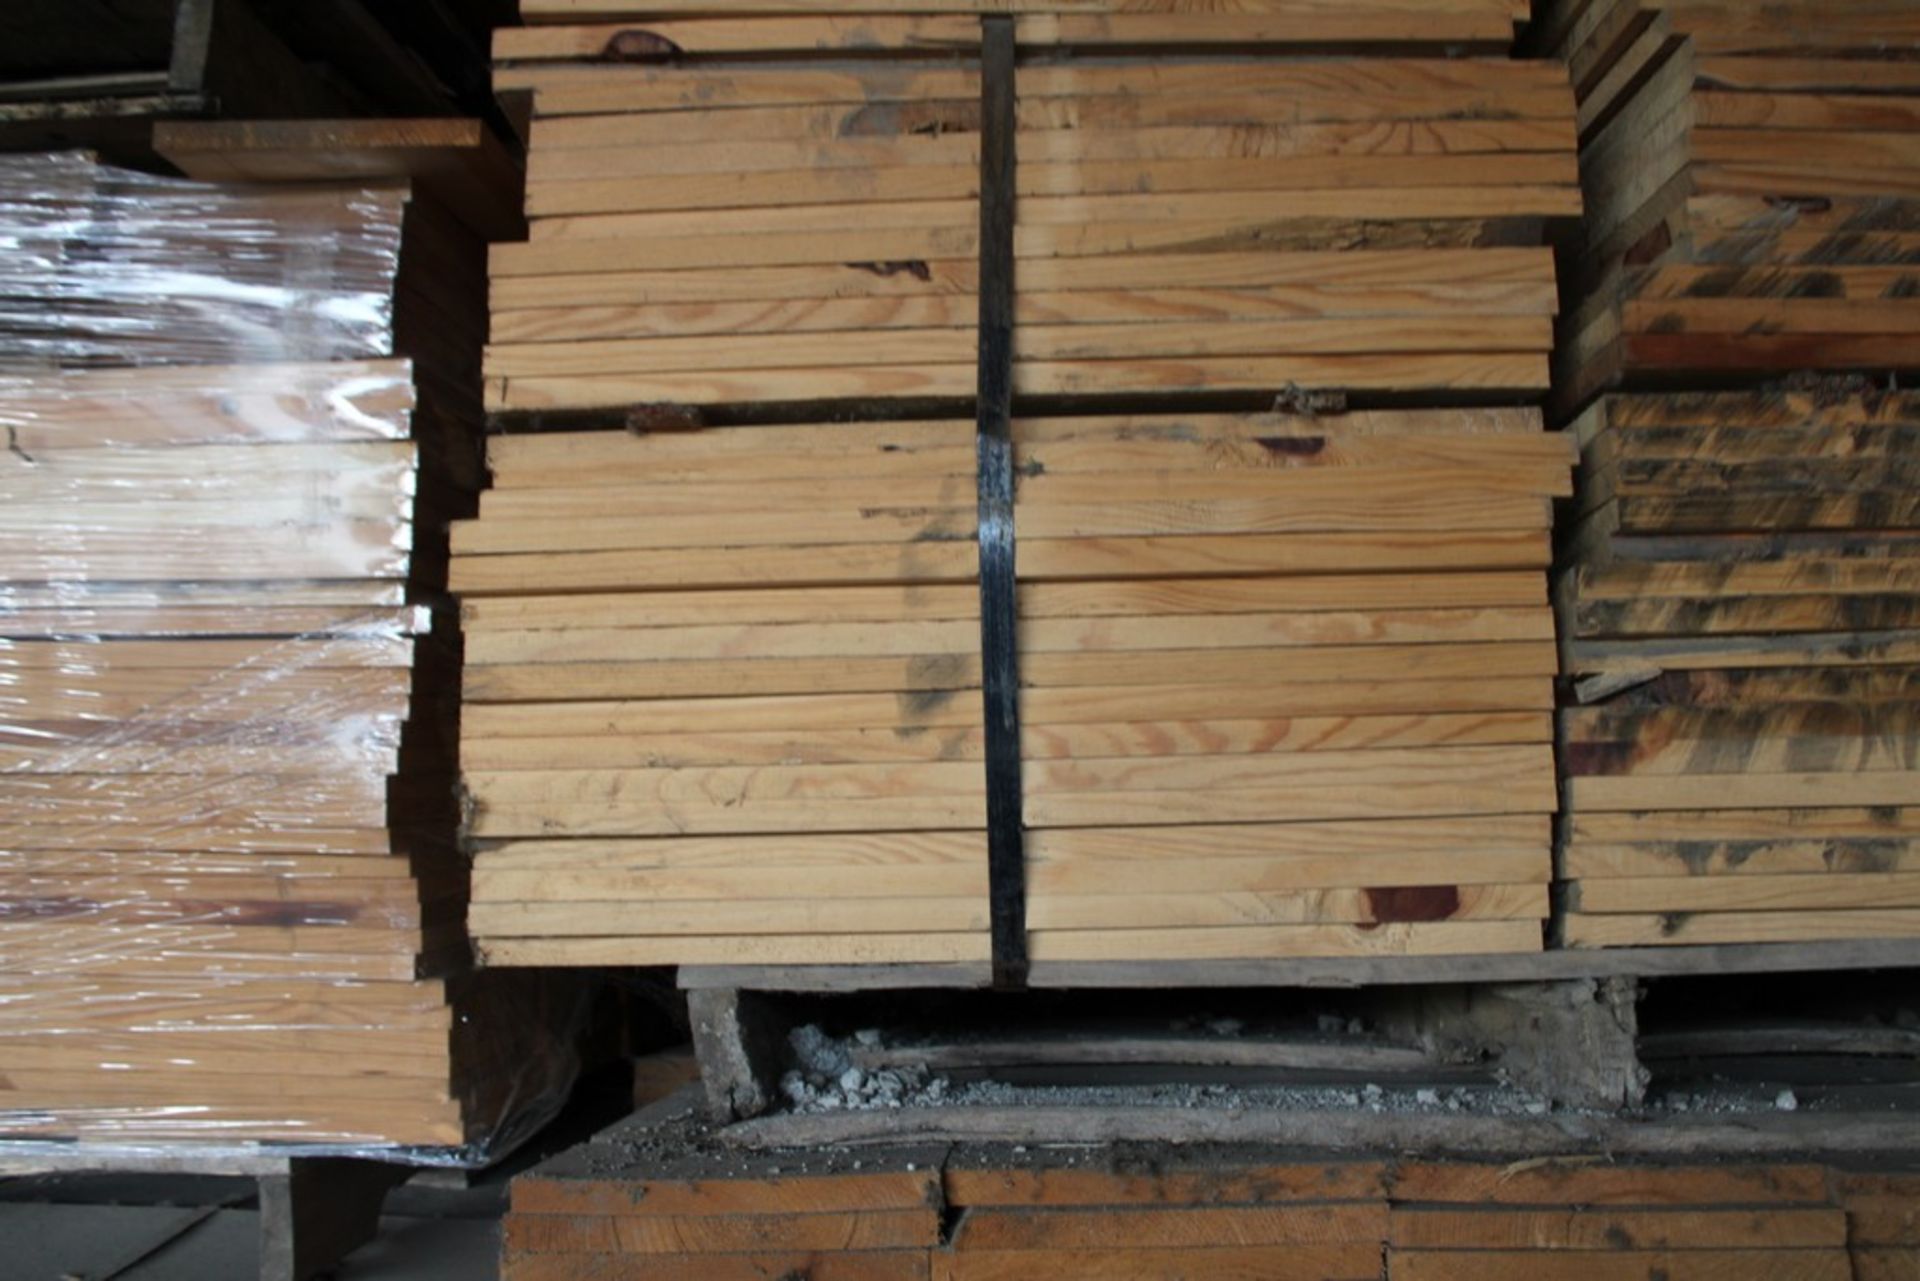 LARGE QUANTITY OF 9" X 24" PINE BOARDS IN STACK - Image 2 of 2